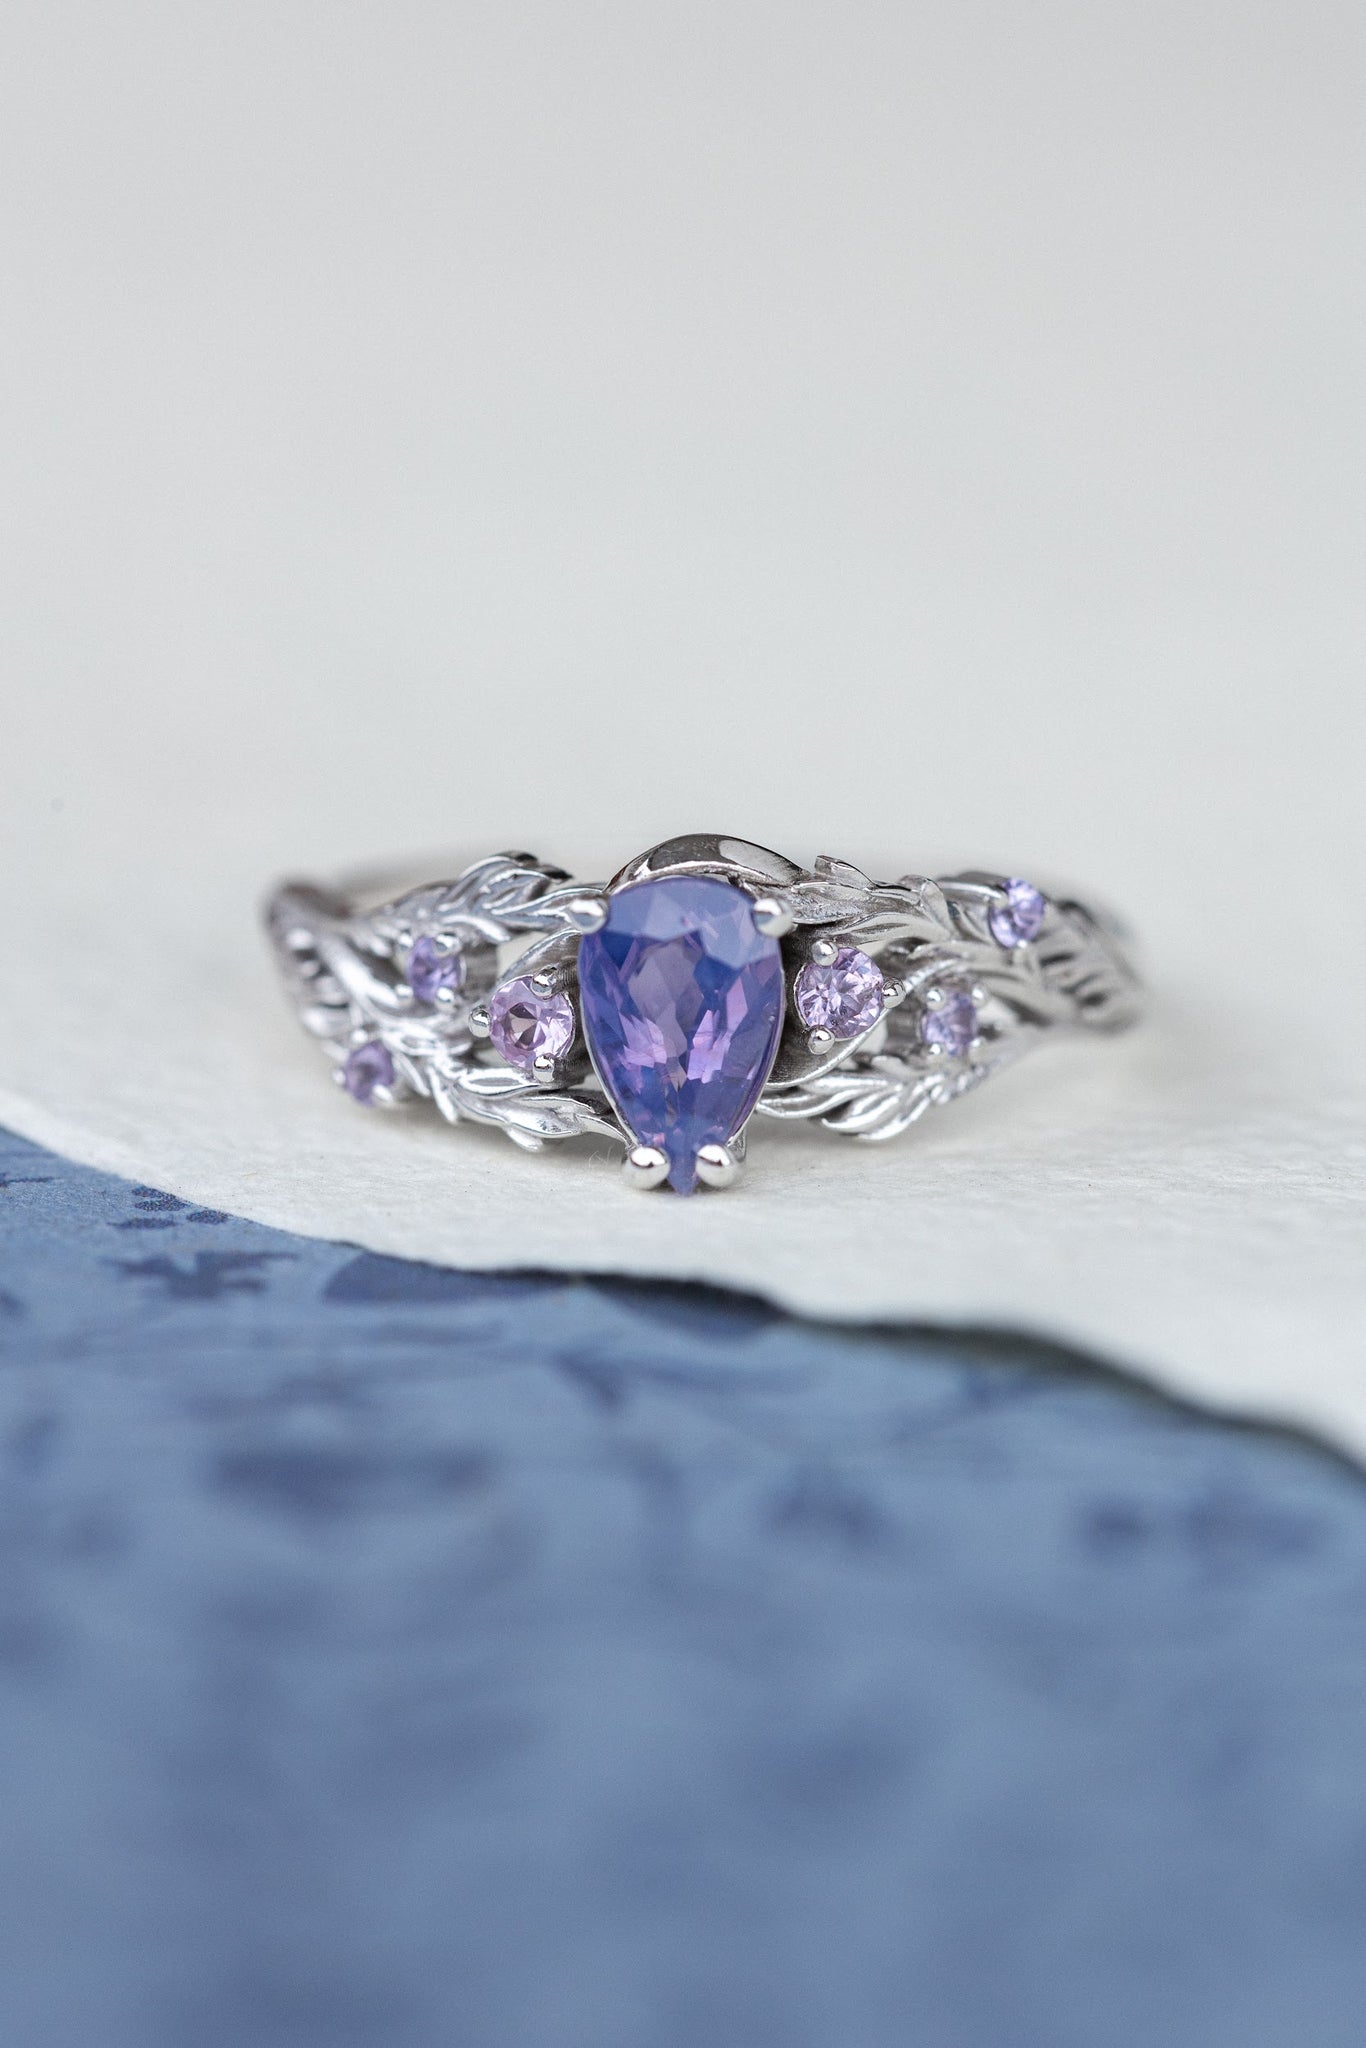 Opalescent sapphire engagement rings